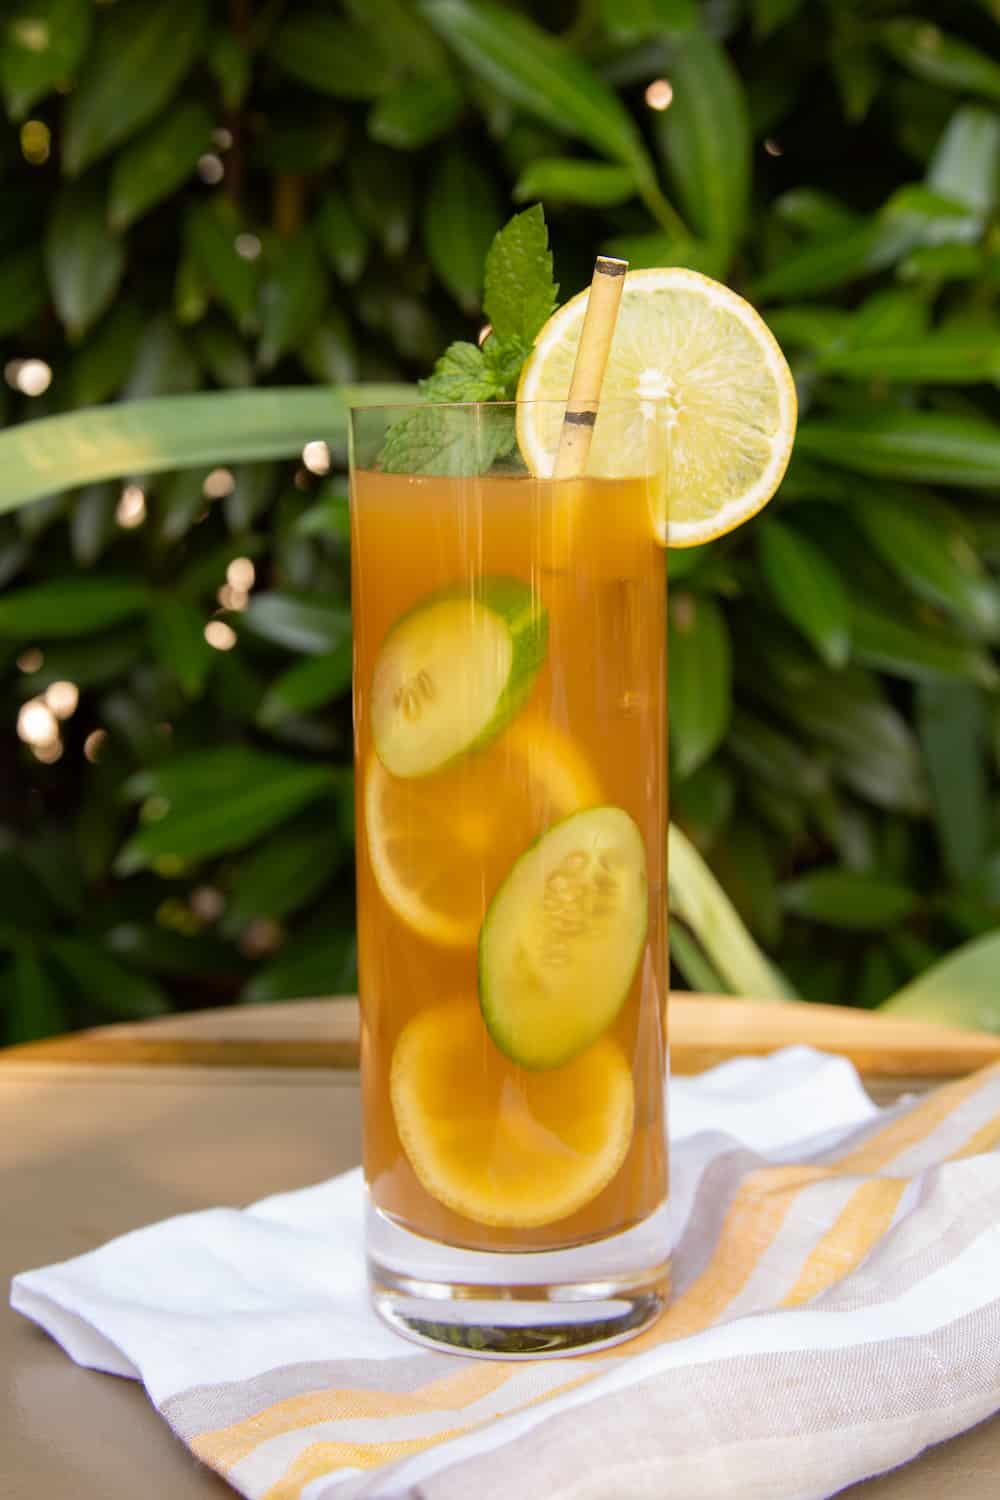 The Pimm’s Palmer: An Arnold Palmer-Style Pimm’s Cup